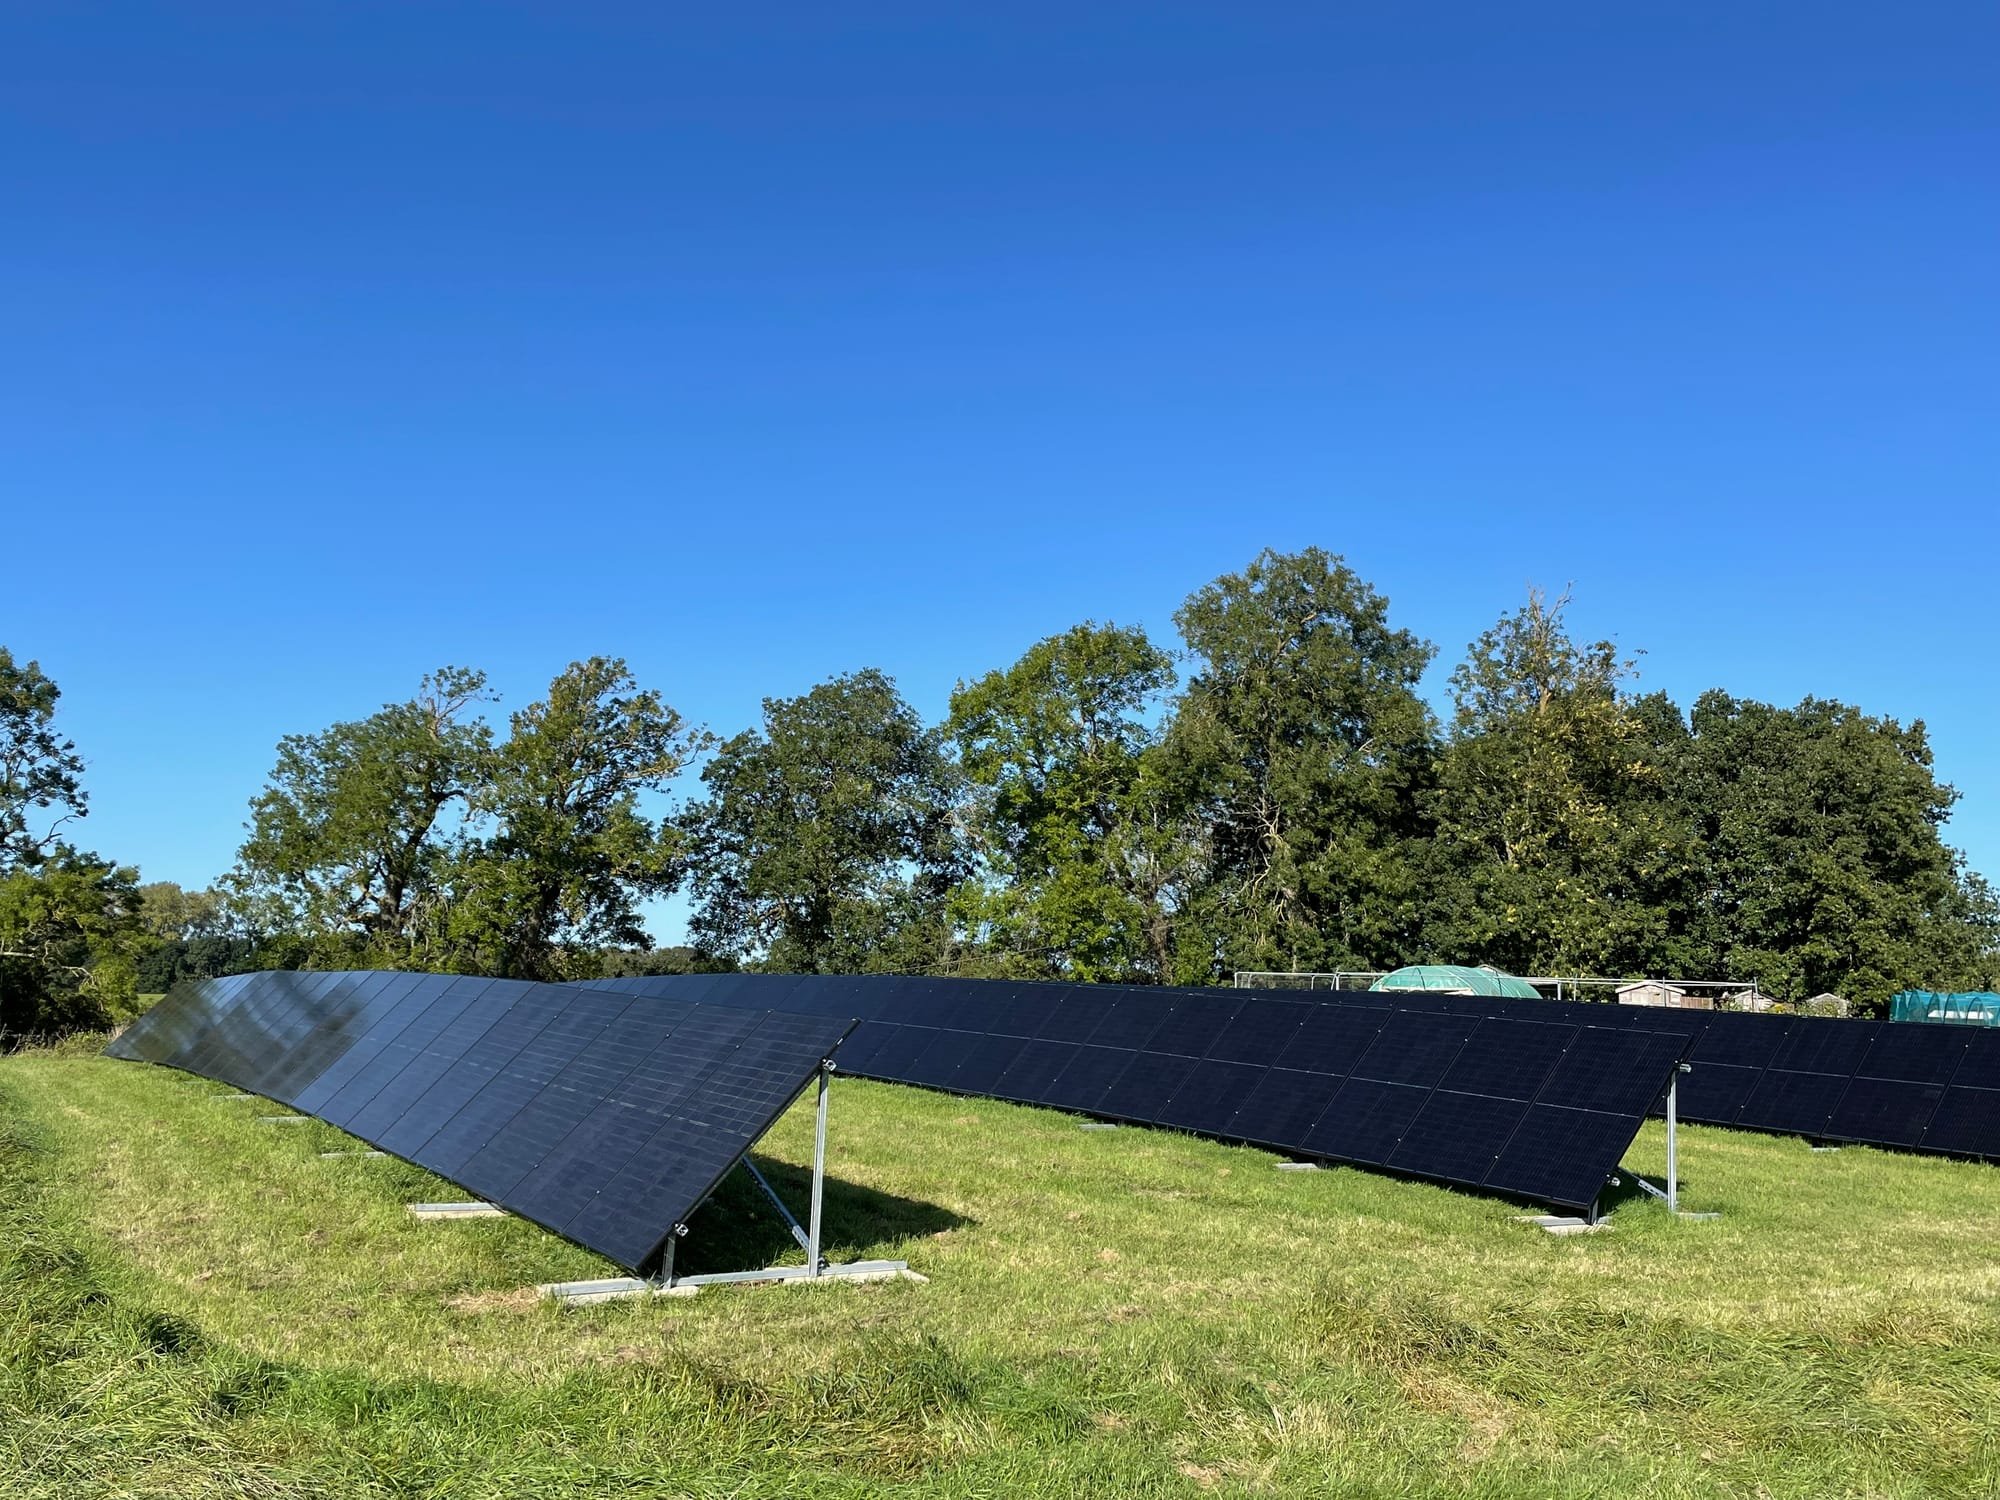 Solar Partner designs, supplies and installs a 30 kWp ground mount system.